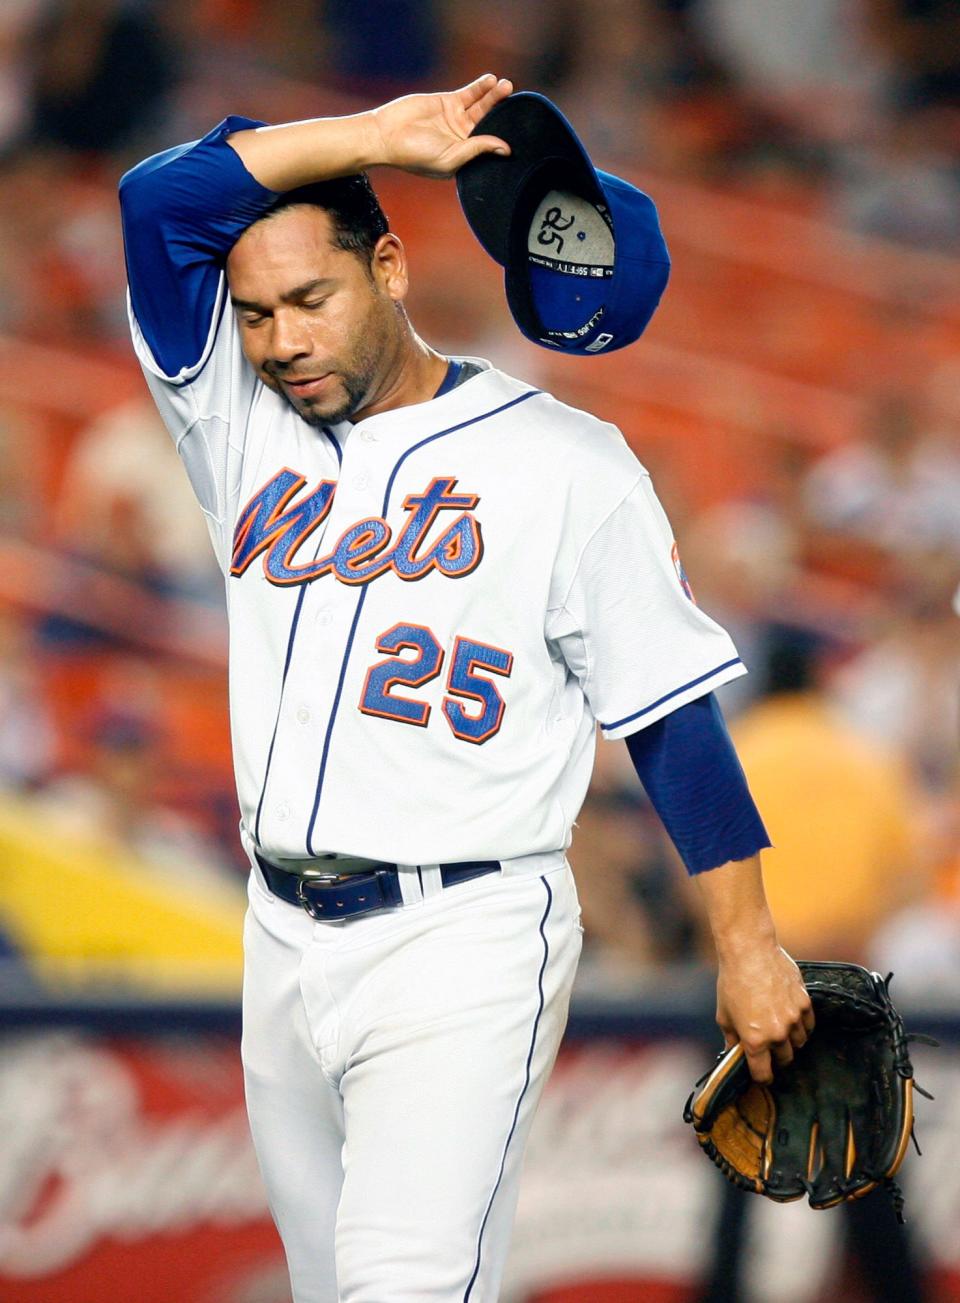 Pedro Feliciano was among baseball's best left-on-left relievers in baseball during his career.